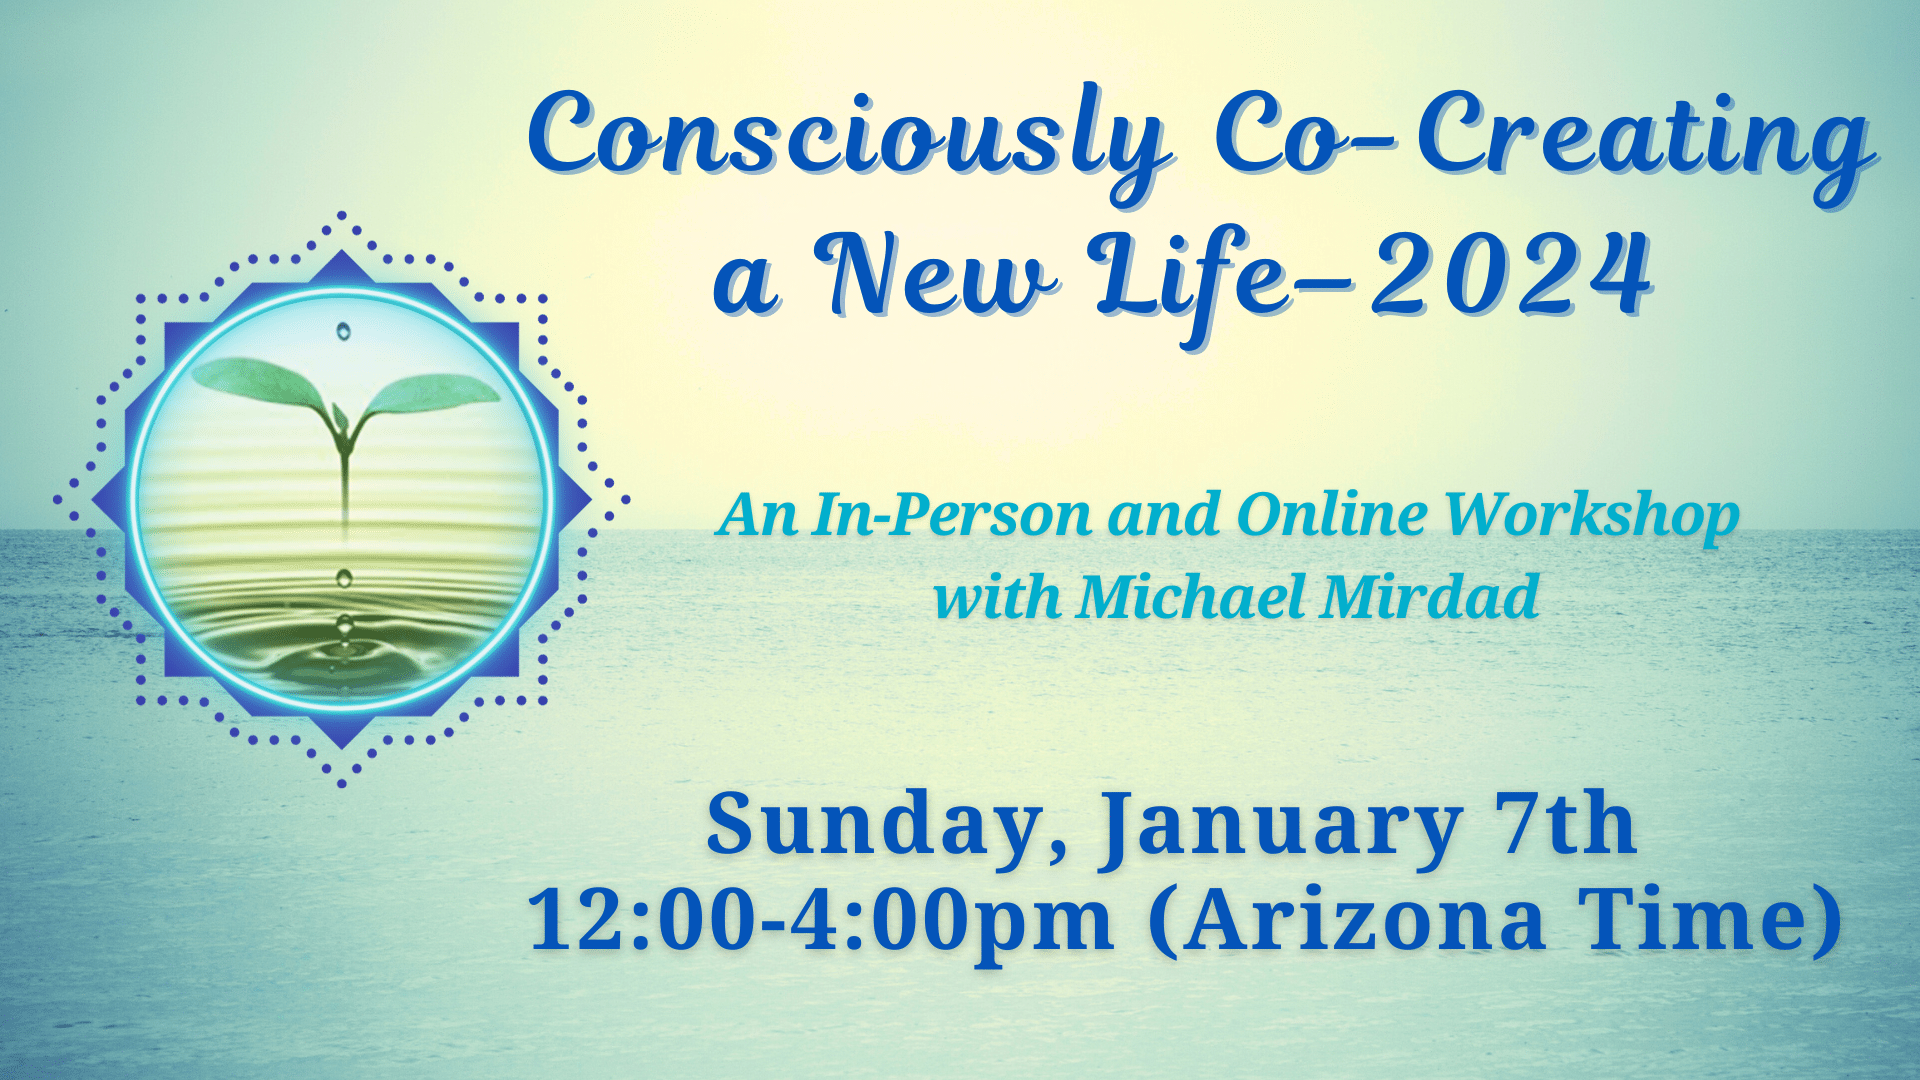 Consciously co-creating a new life in 2024.